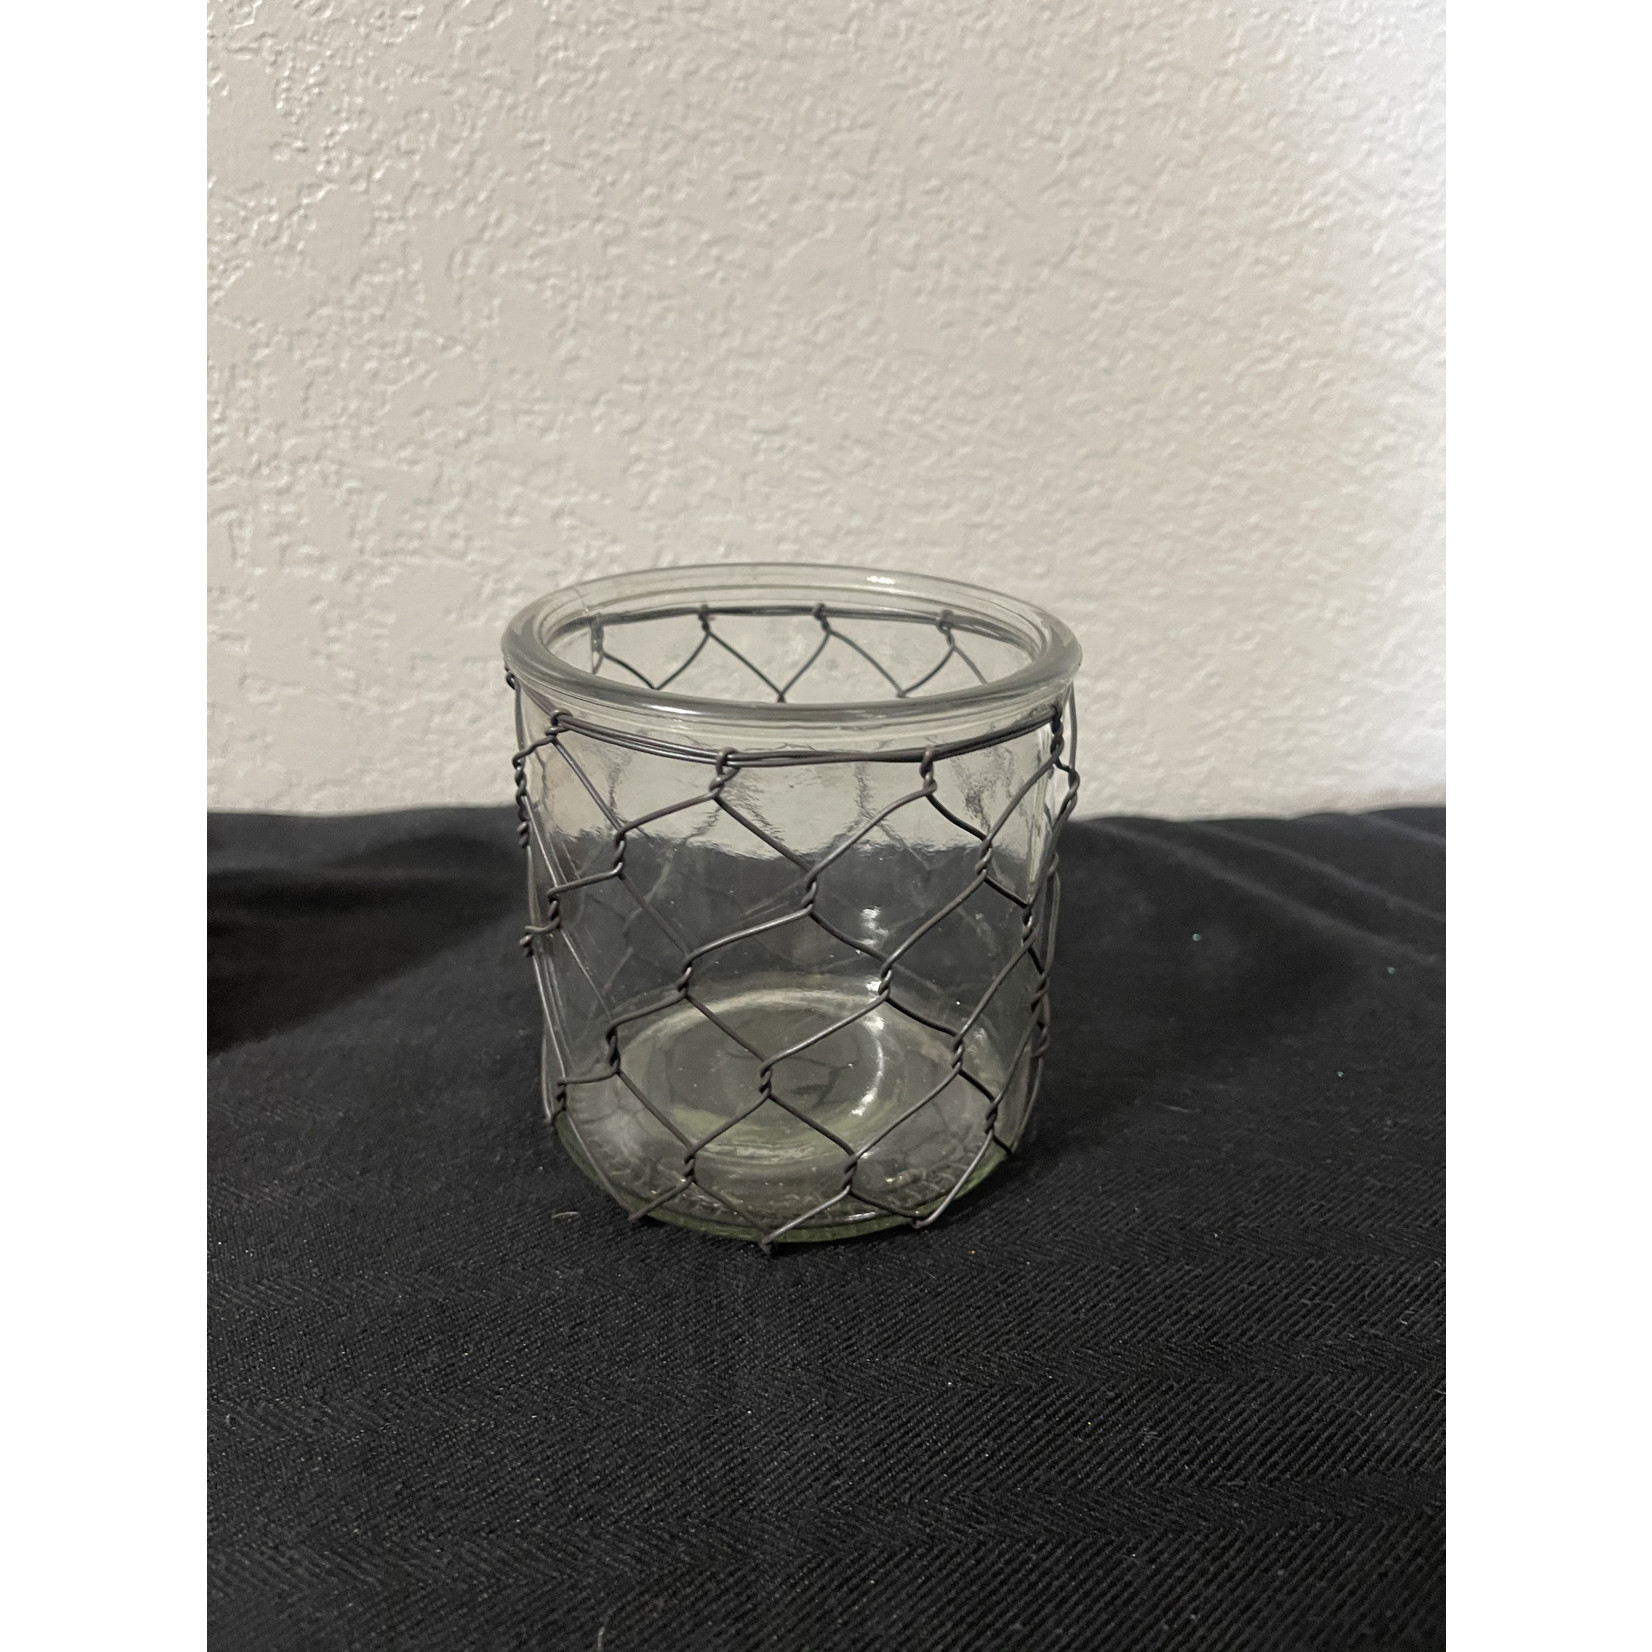 Candle Holder w/ Poultry Wire